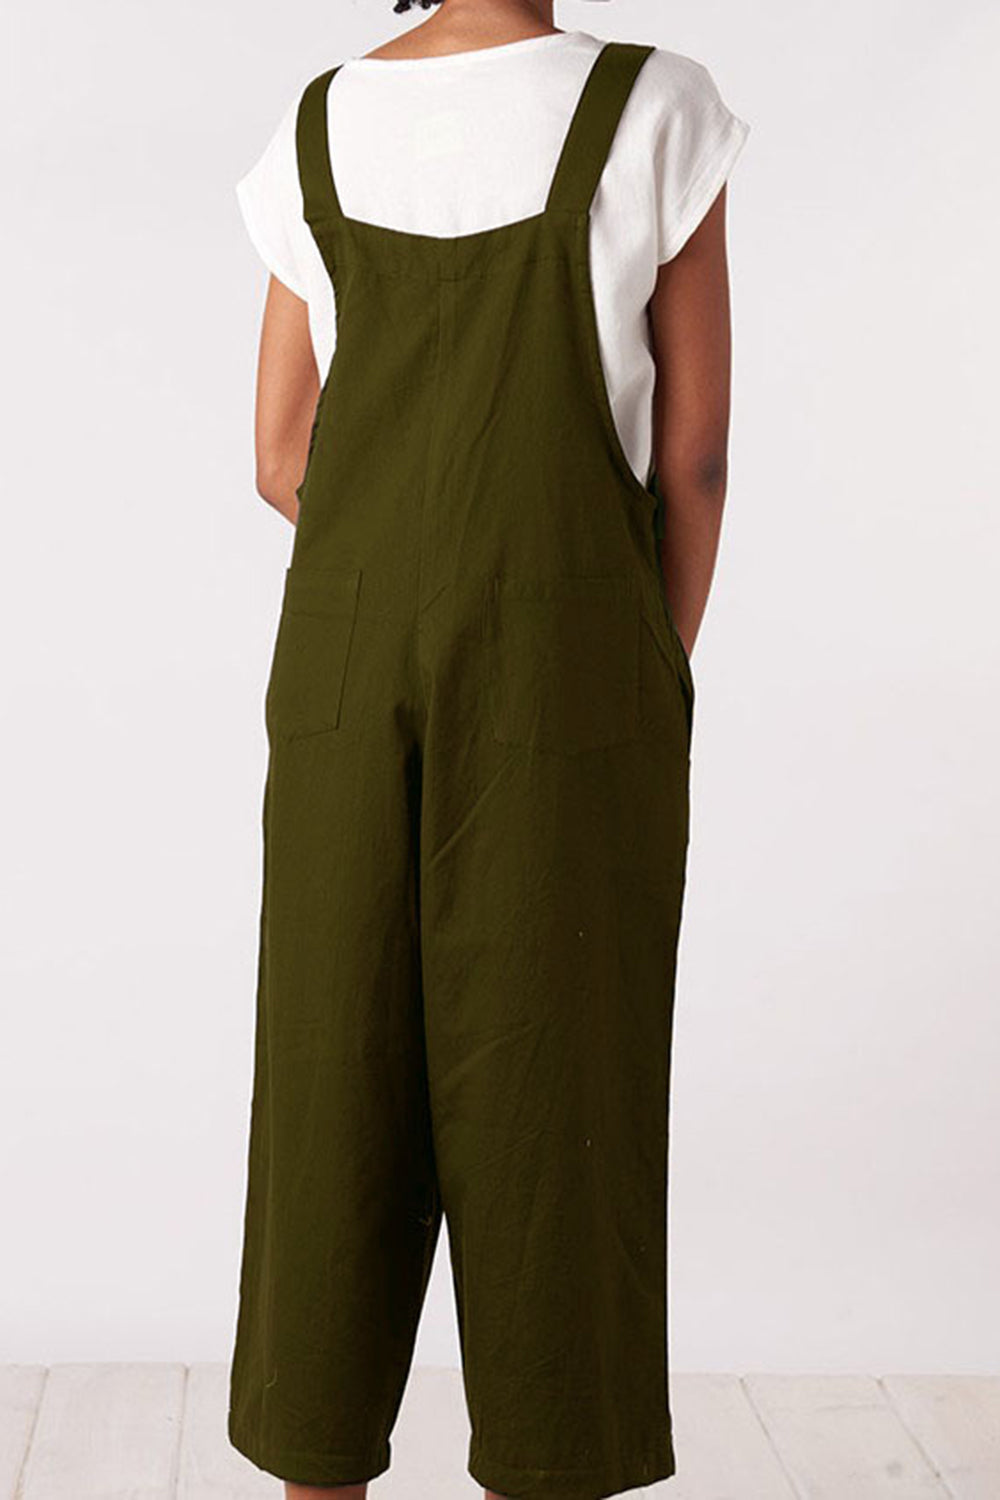 Square Neck Wide Strap Jumpsuit - Mulberry Skies